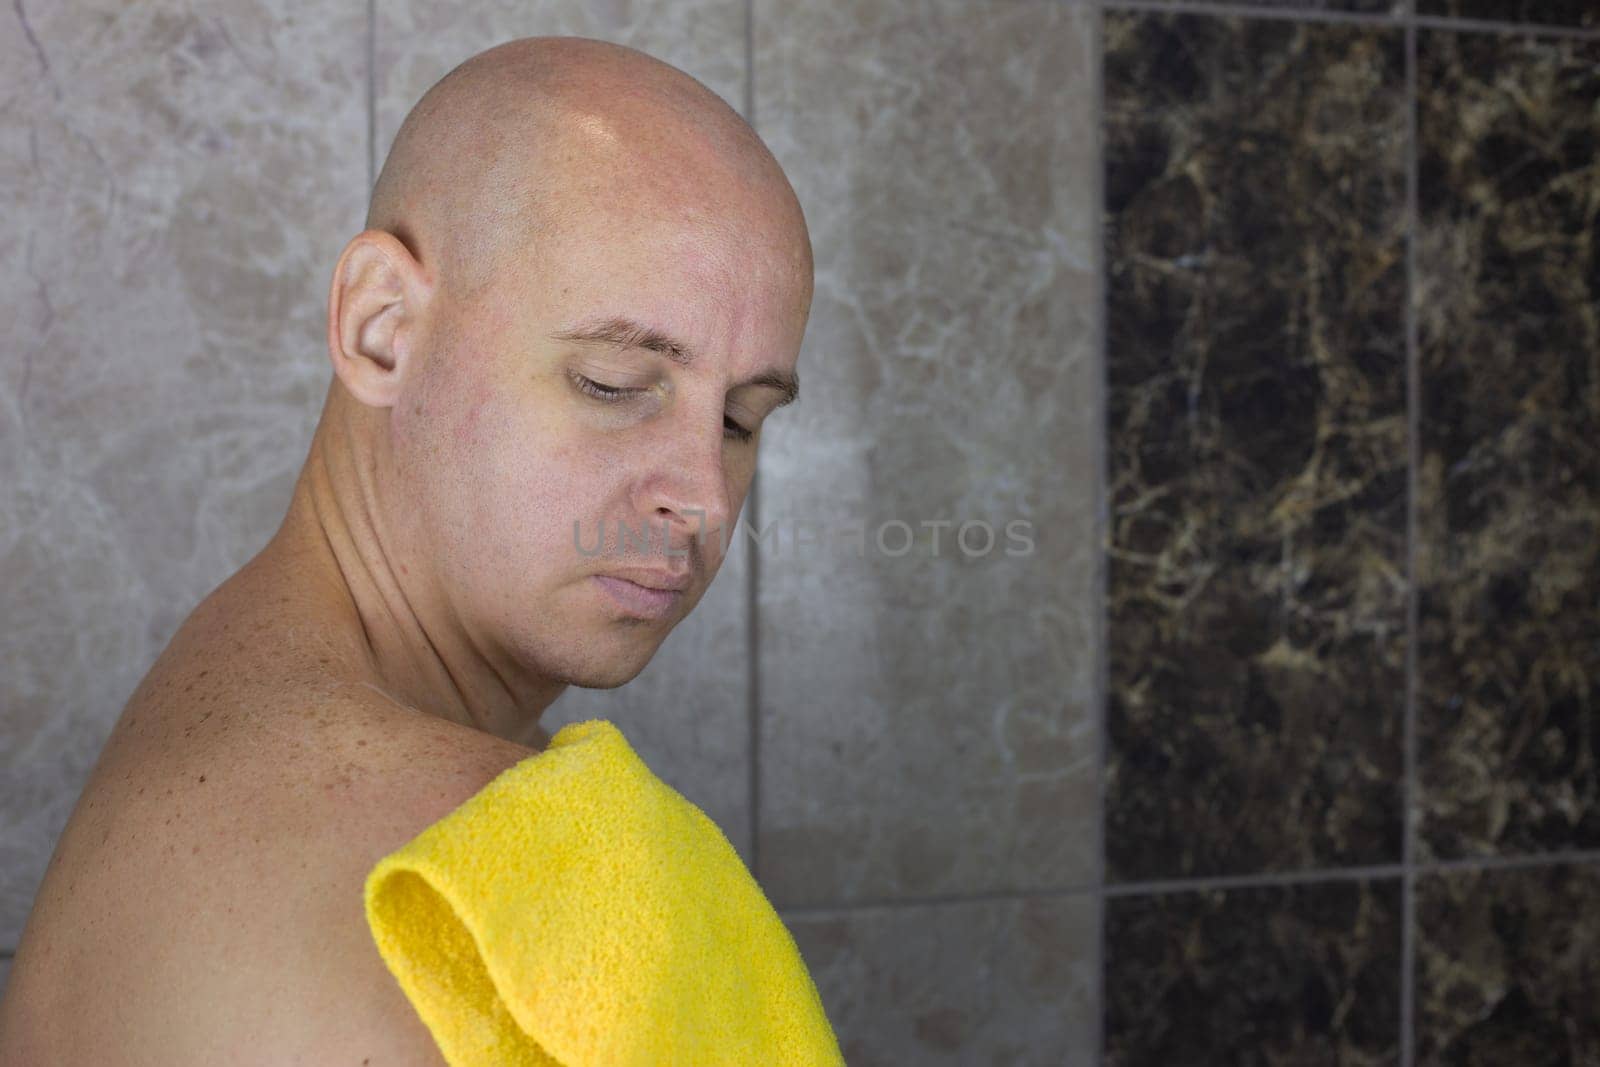 Man rubs his shoulder with washcloth in the shower, care and hygiene of body and skin at home